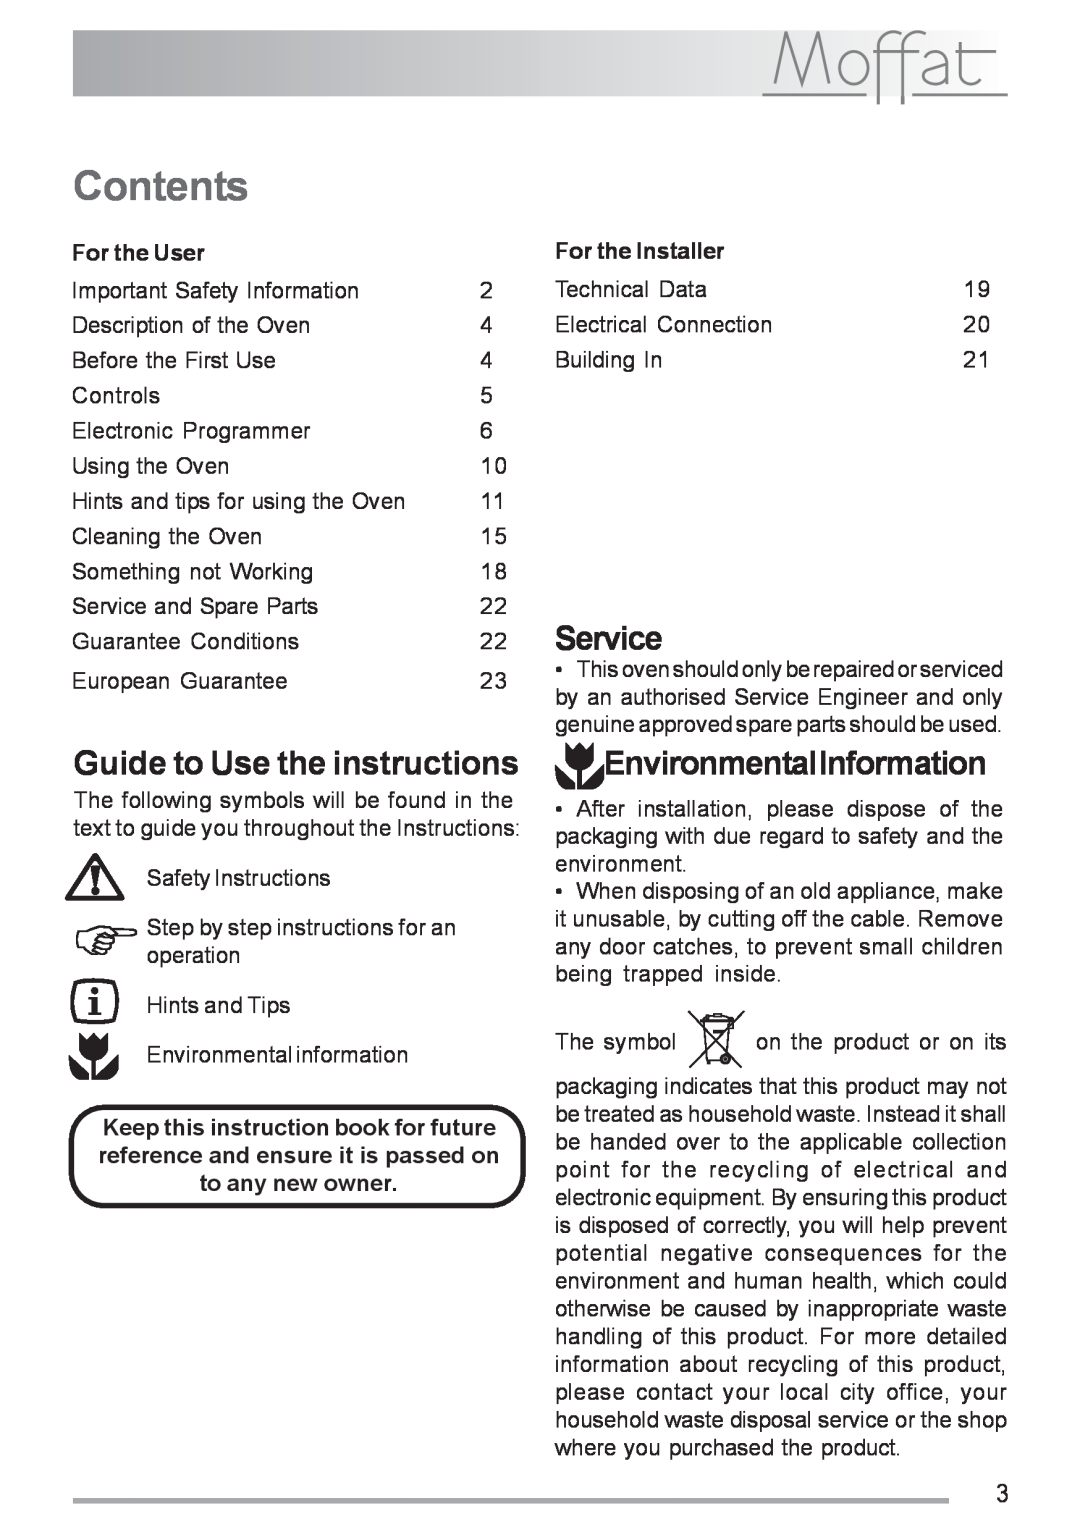 Moffat MSF 616 Contents, Service, Guide to Use the instructions, EnvironmentalInformation, For the User, For the Installer 